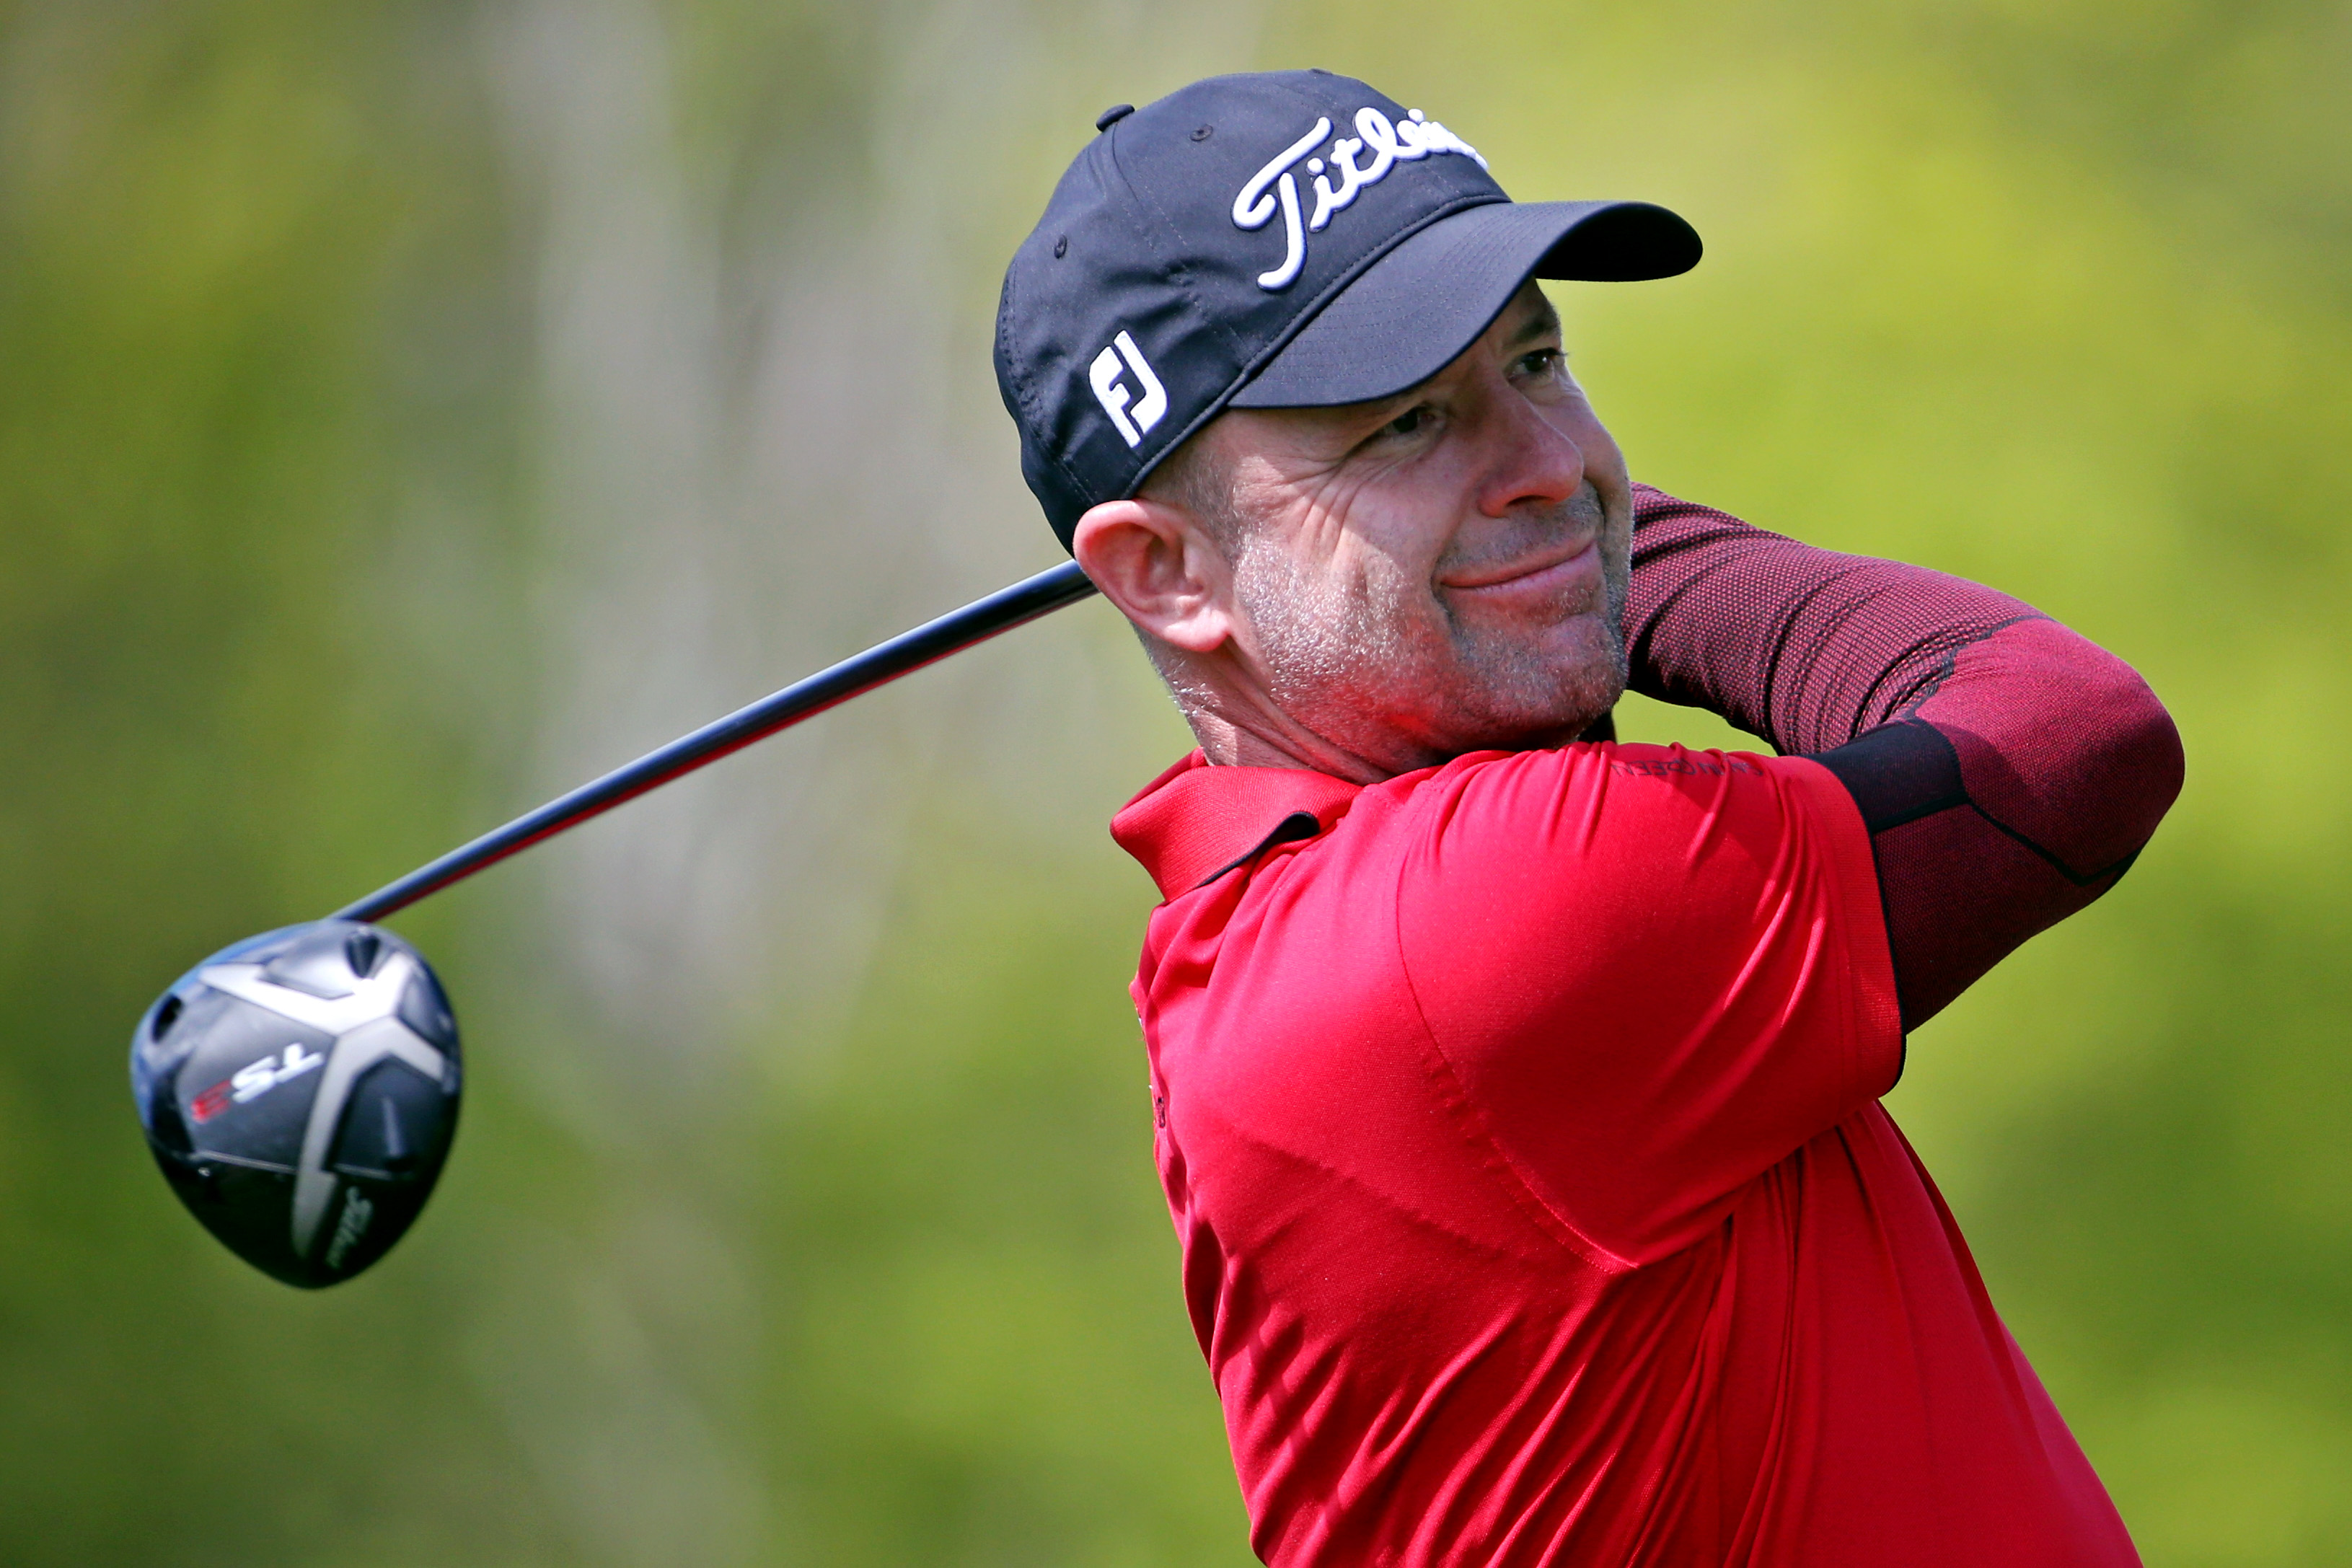 PGA Club Professional trio Jertson, Labritz, Vermeer will spend the weekend at Bethpage Black